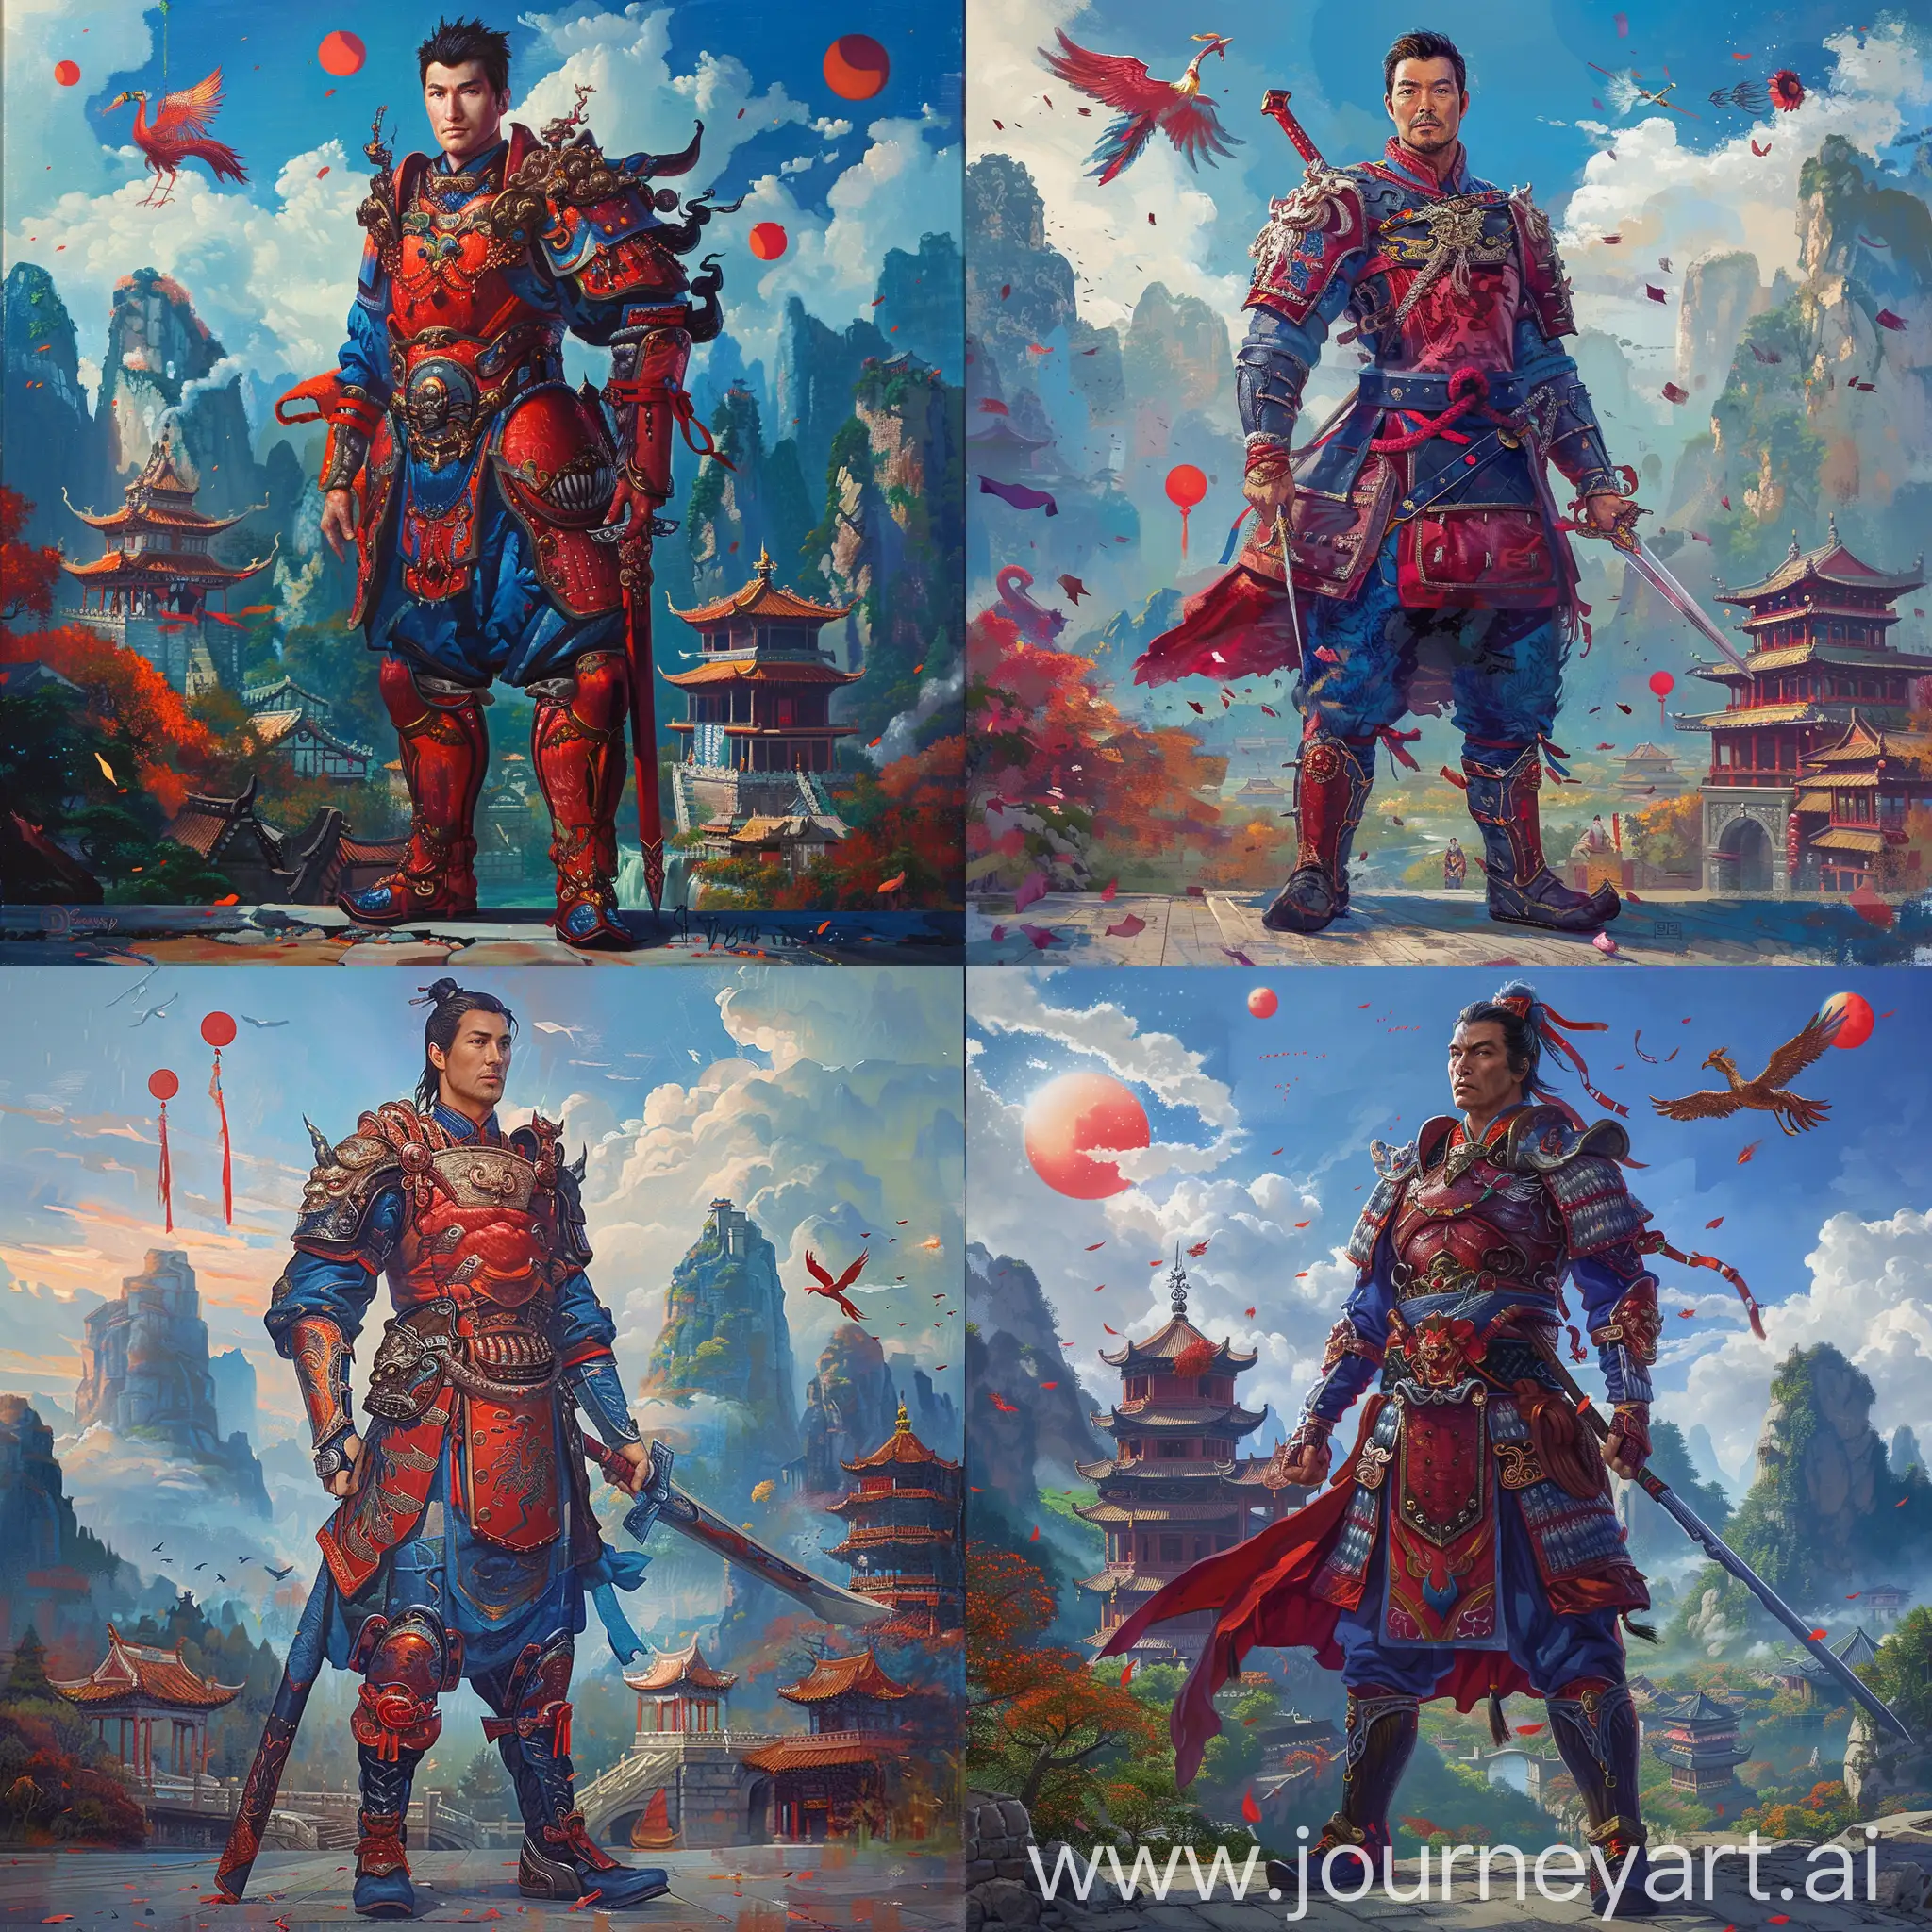 Disney-Style-Chinese-General-Li-Shang-in-Medieval-Armor-against-Guilin-Mountain-Temple-Backdrop